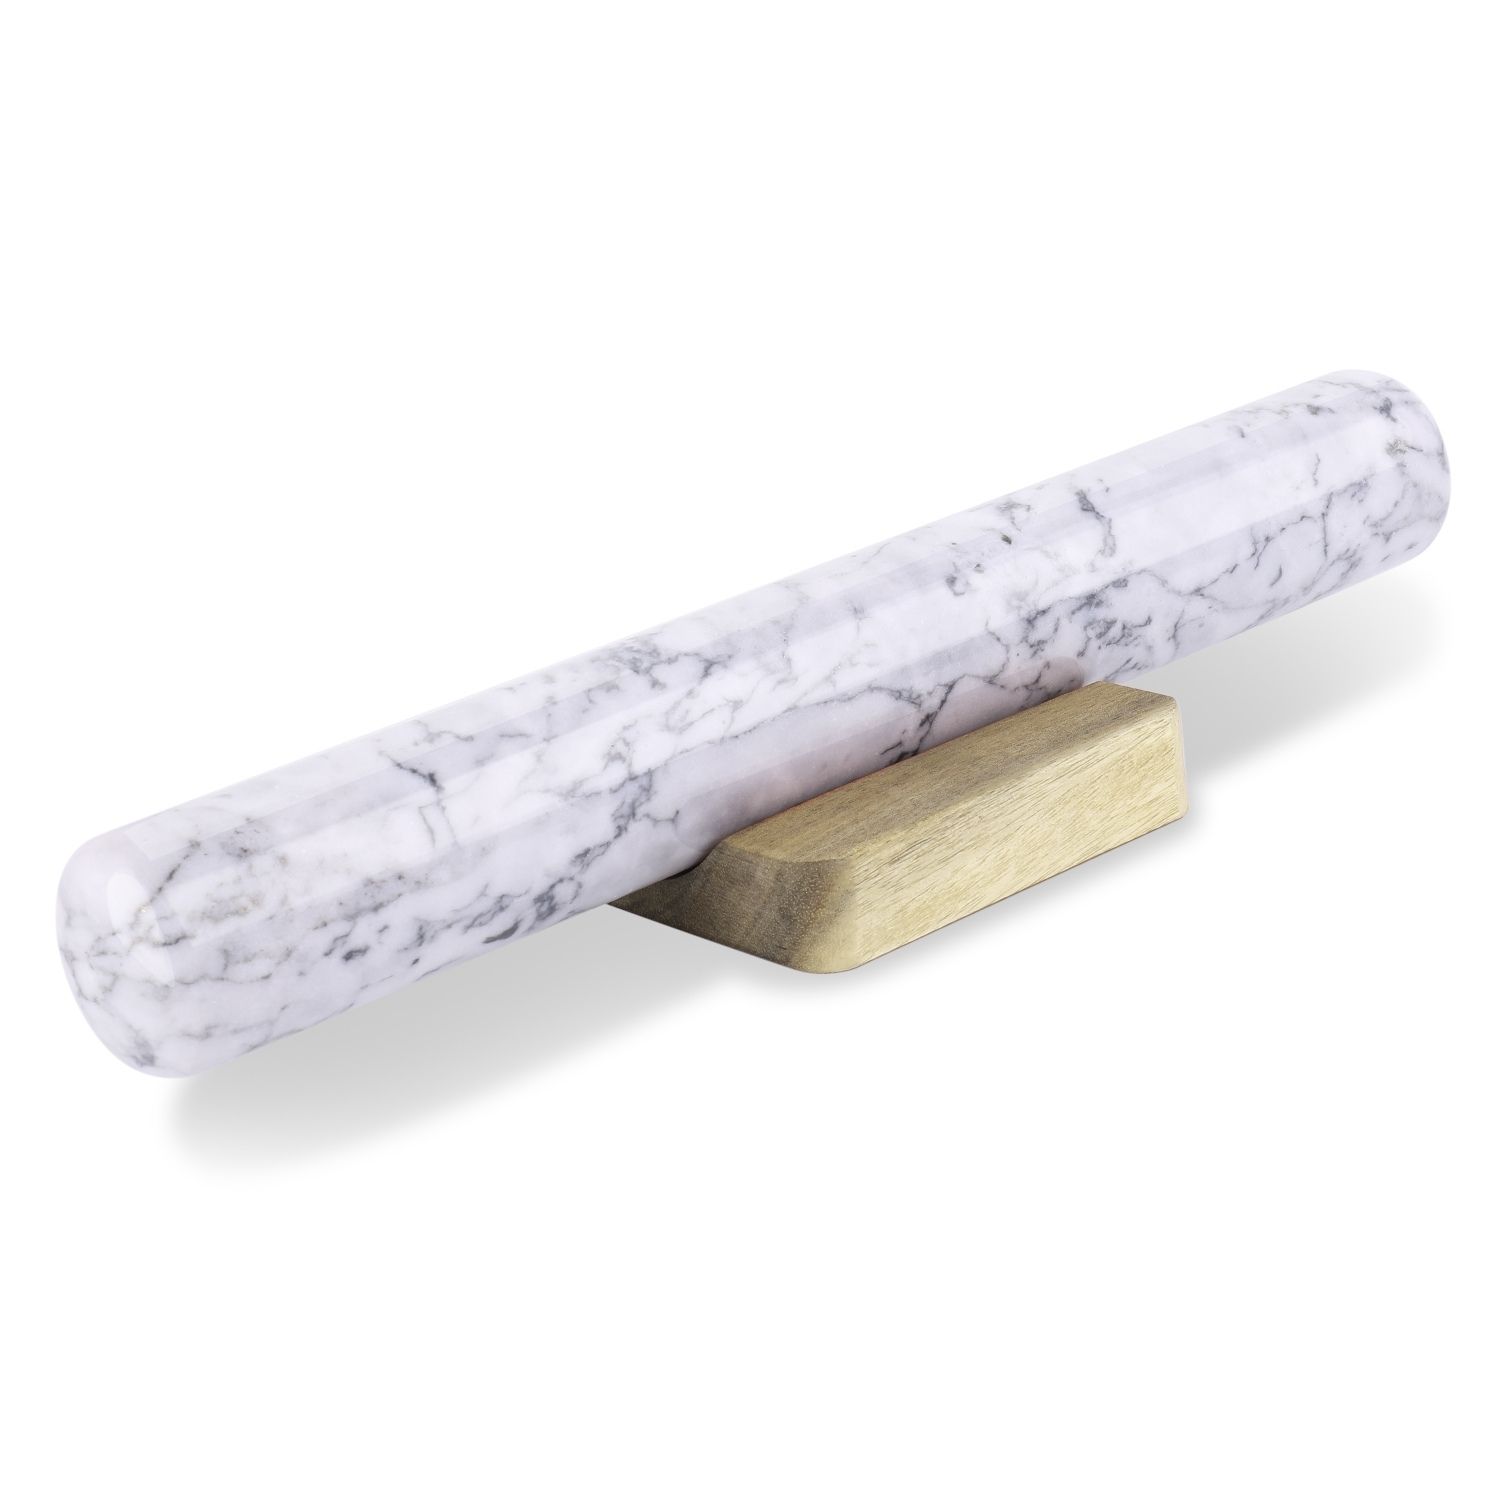 French Rolling Pin, 12-inch White Marble Dowel Rolling Pin with Wooden Holder Base Stand, Marble Rolling Pin for Baking Pastry Pizza Dough Roller Fondant Cookie Pie Crust Pasta Bakery Roller